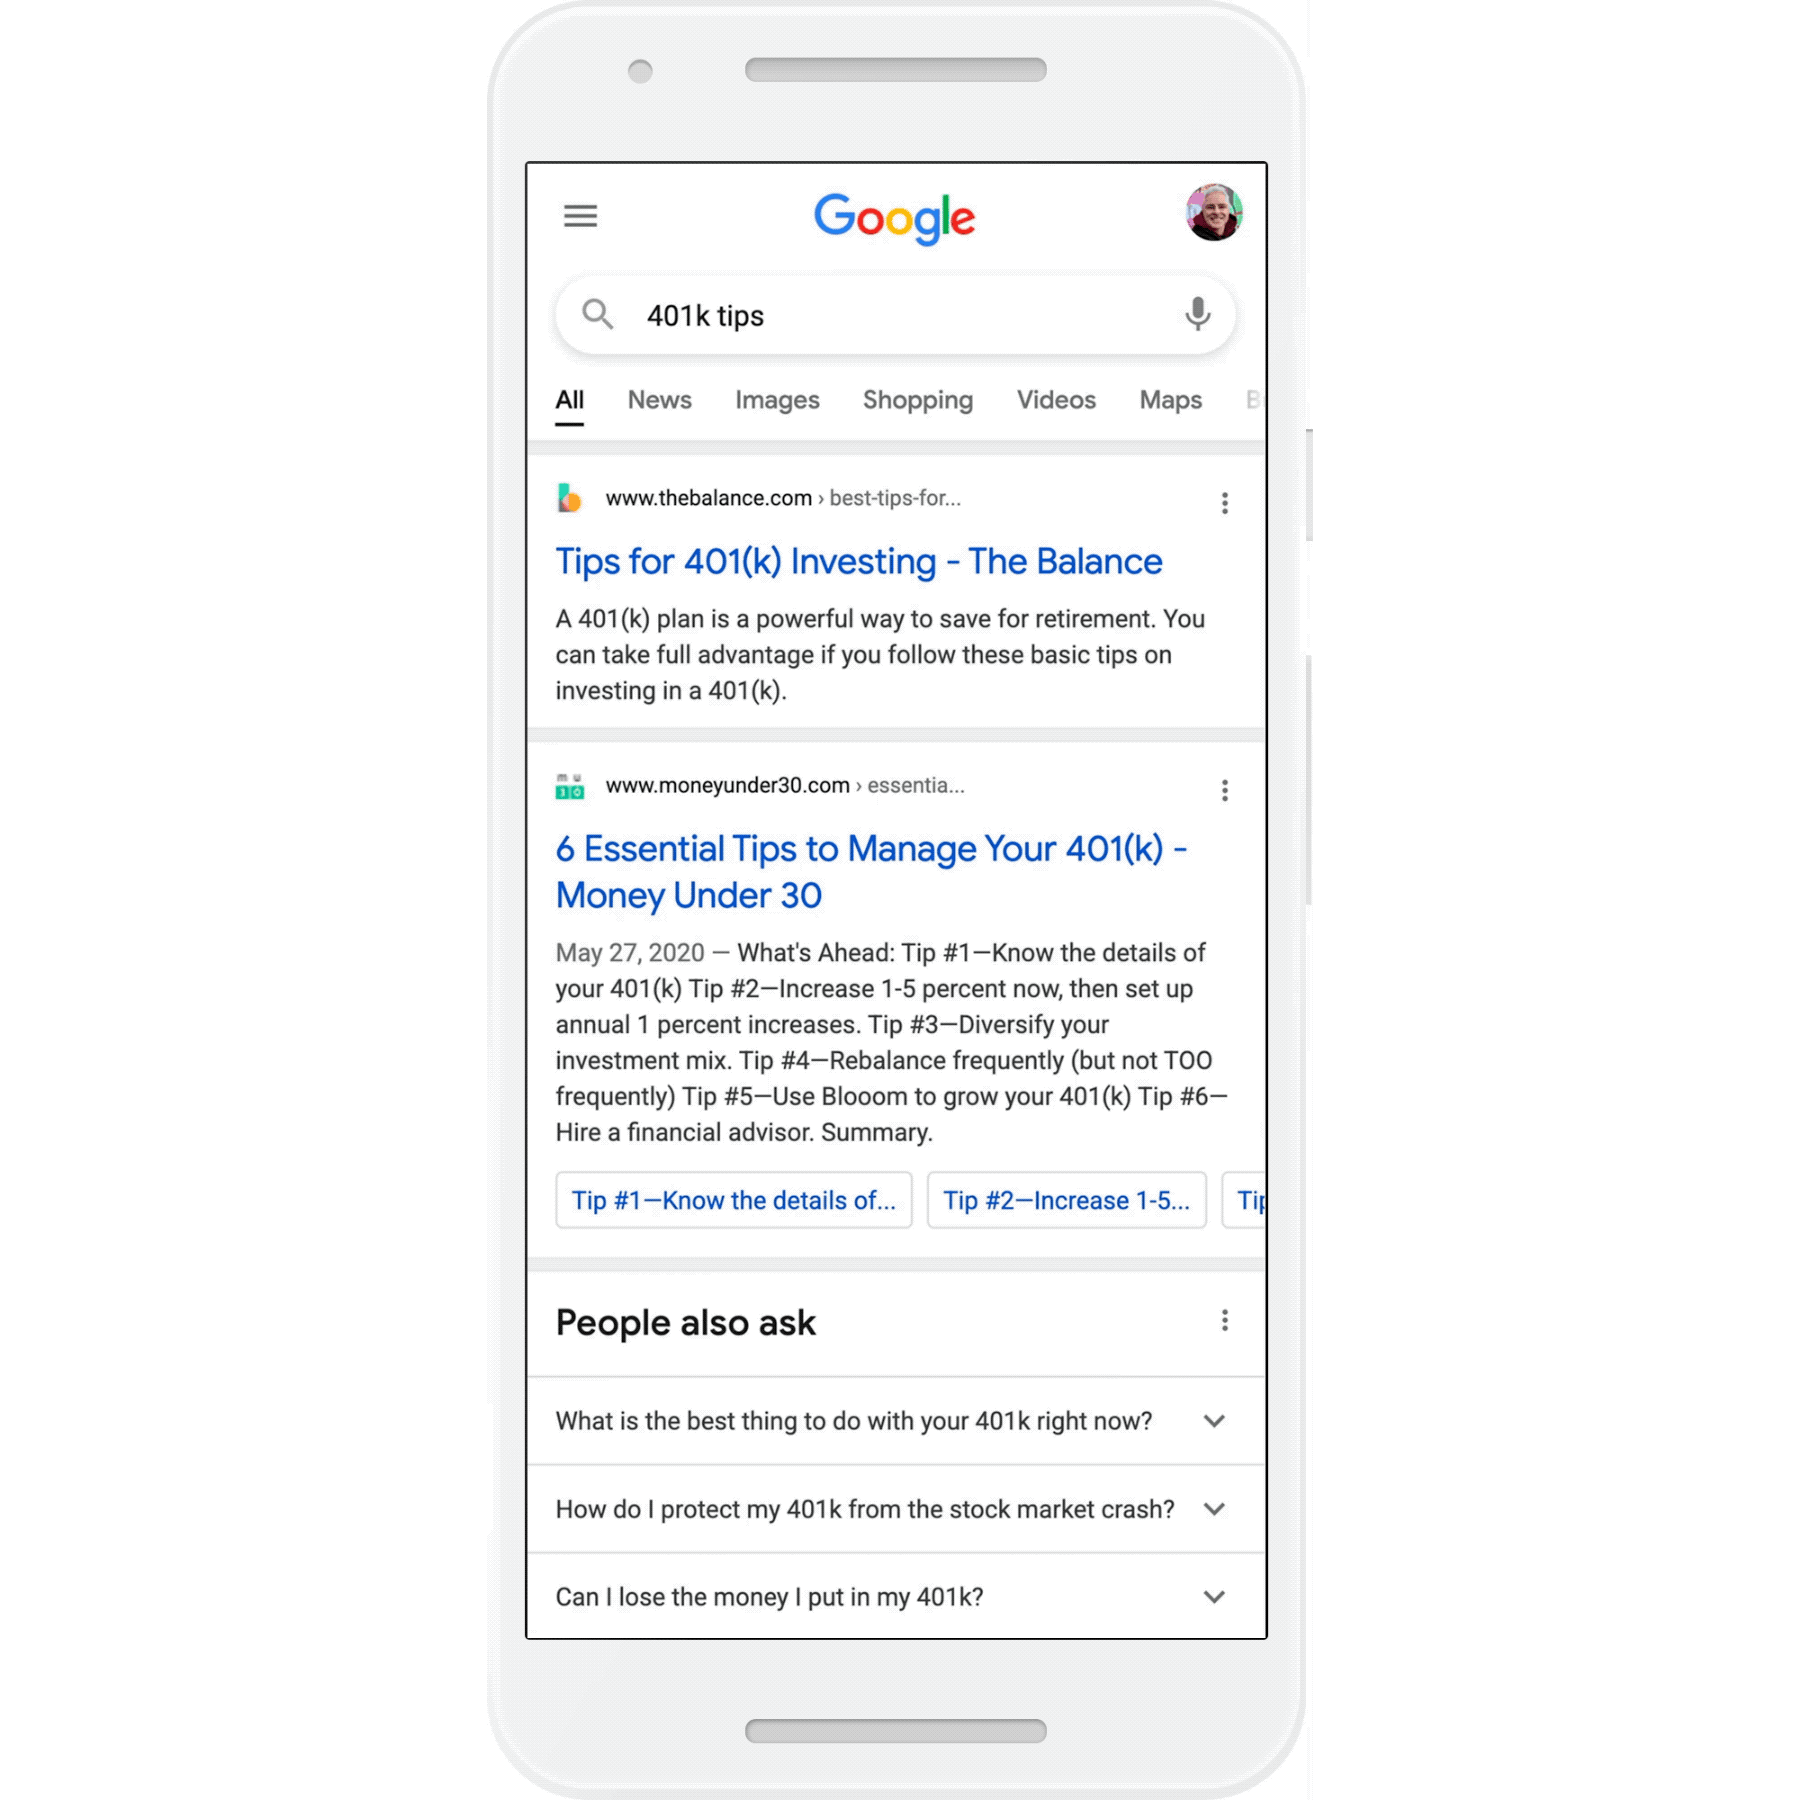 New Google Results